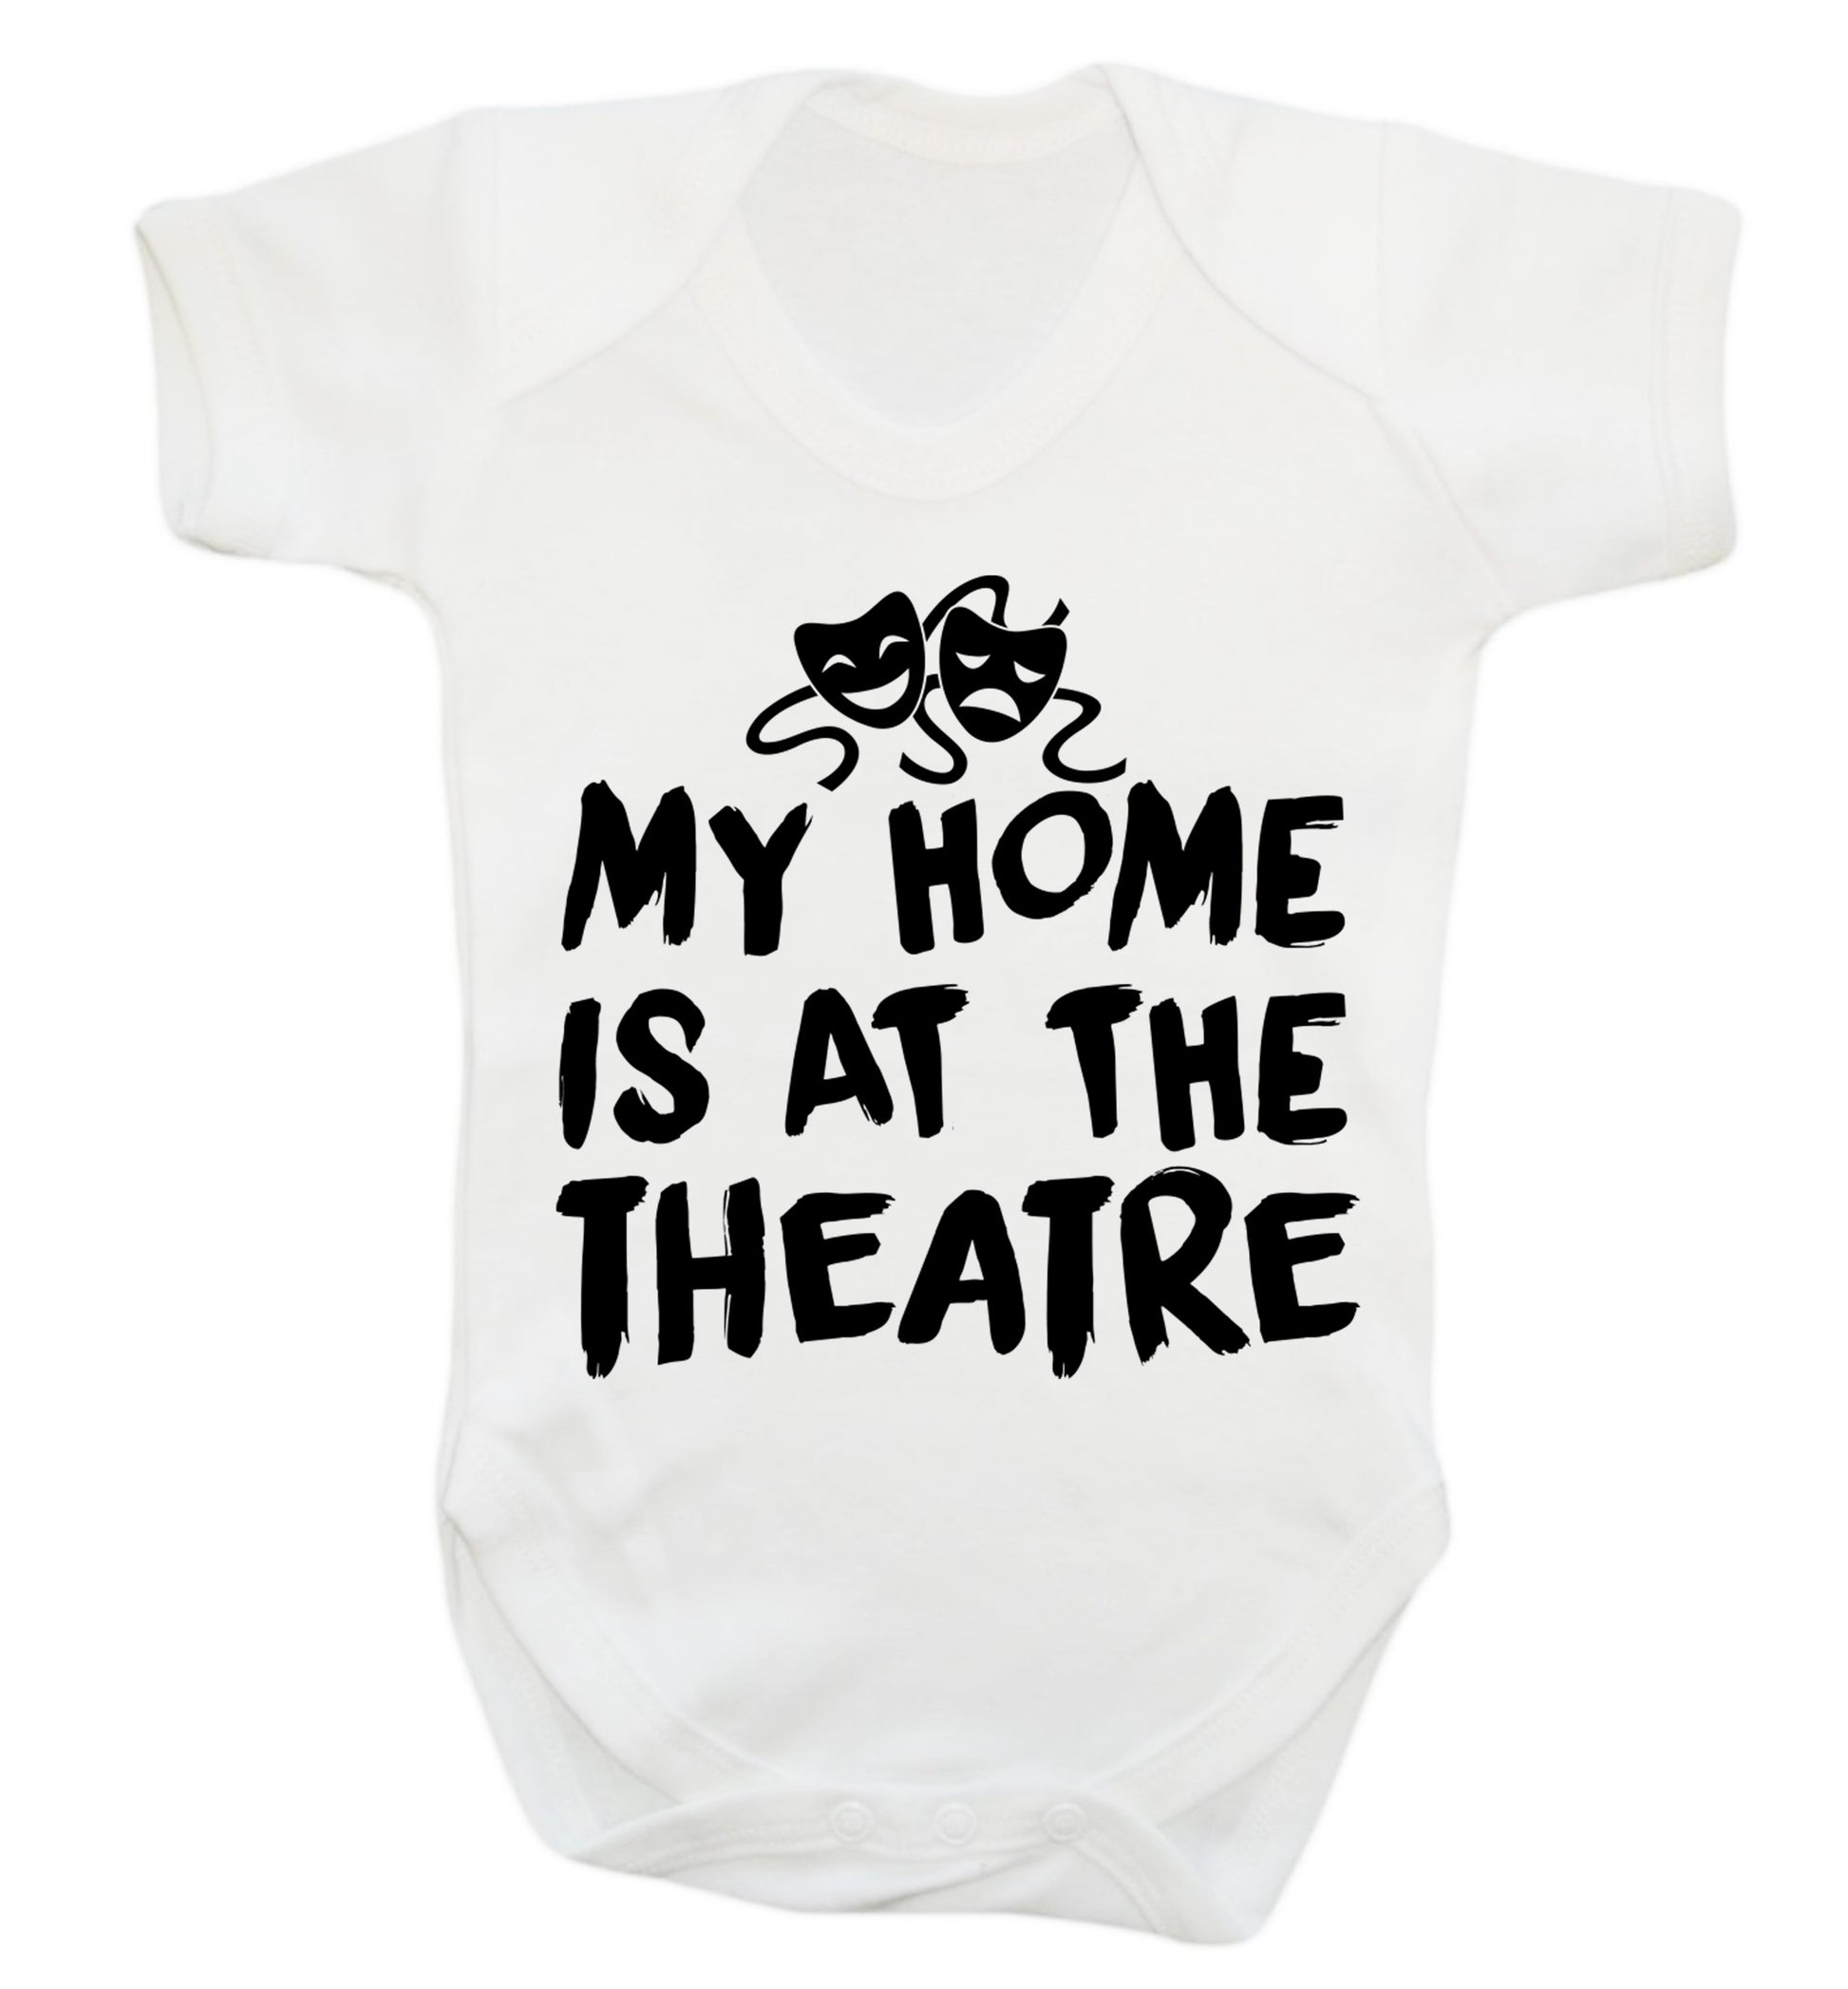 My home is at the theatre Baby Vest white 18-24 months